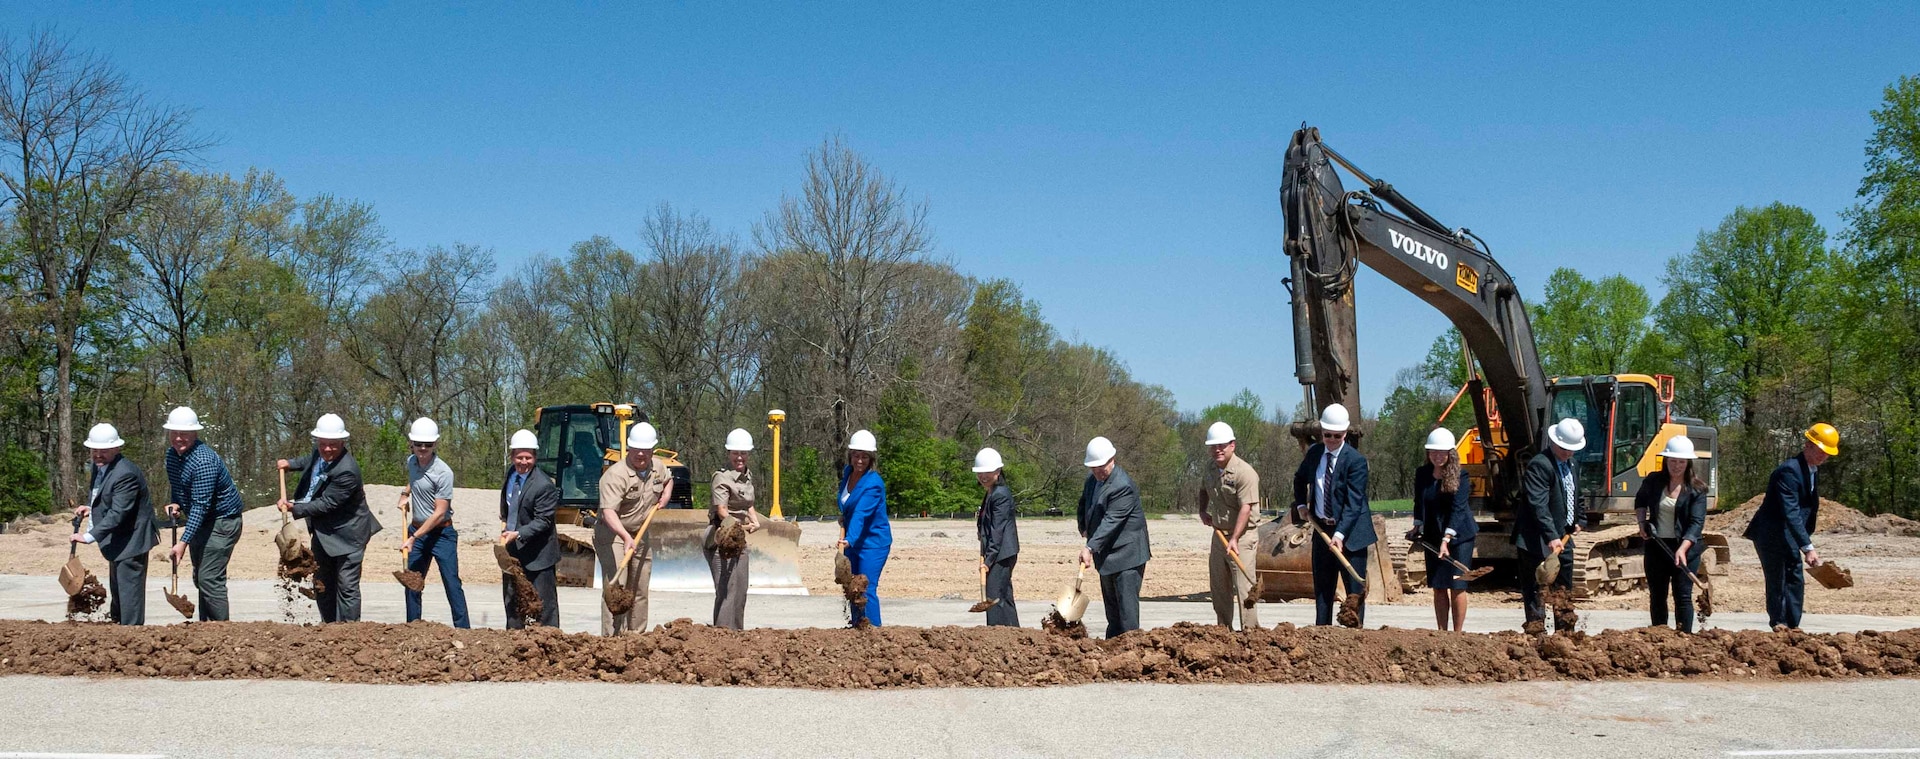 Naval Surface Warfare Center, Crane Division (NSWC Crane) held a groundbreaking ceremony for a new strategic missions facility on Monday, April 15. The Strategic Systems Engineering Facility (SSEF) will provide new integrated systems engineering and test capability and is planned to be completed at the end of 2025.